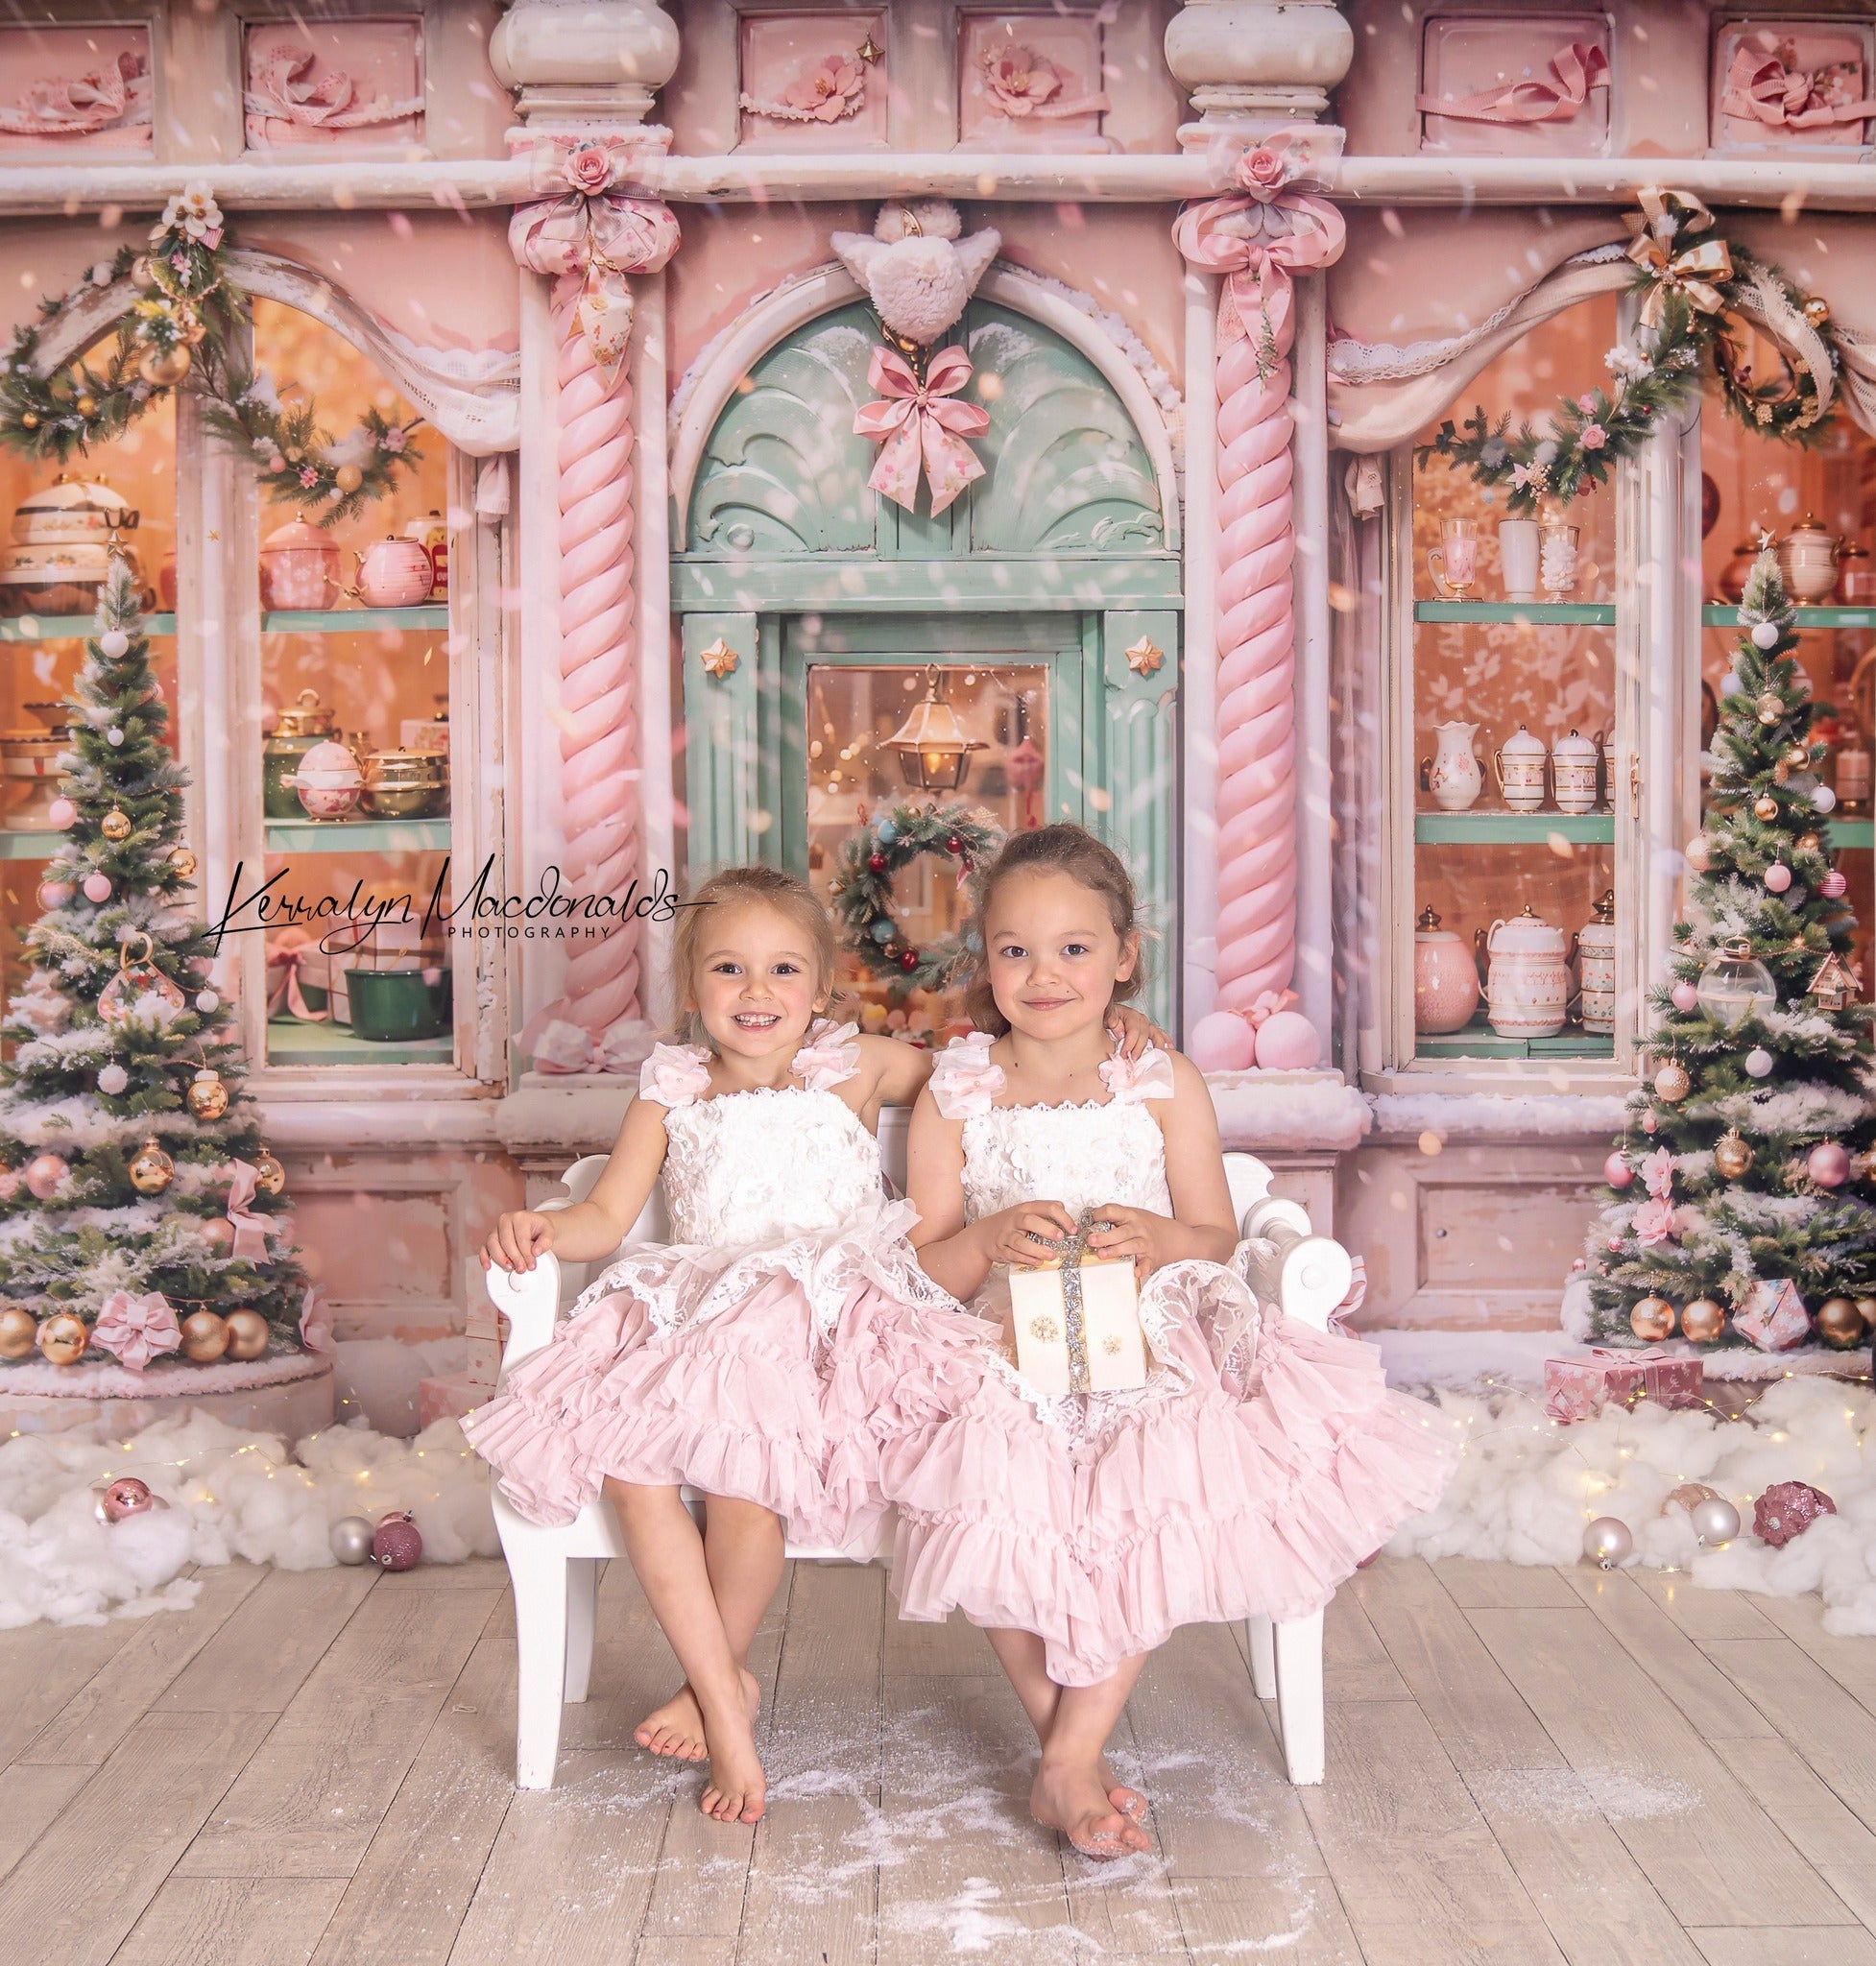 Kate Christmas Pink Store Backdrop Designed by Chain Photography